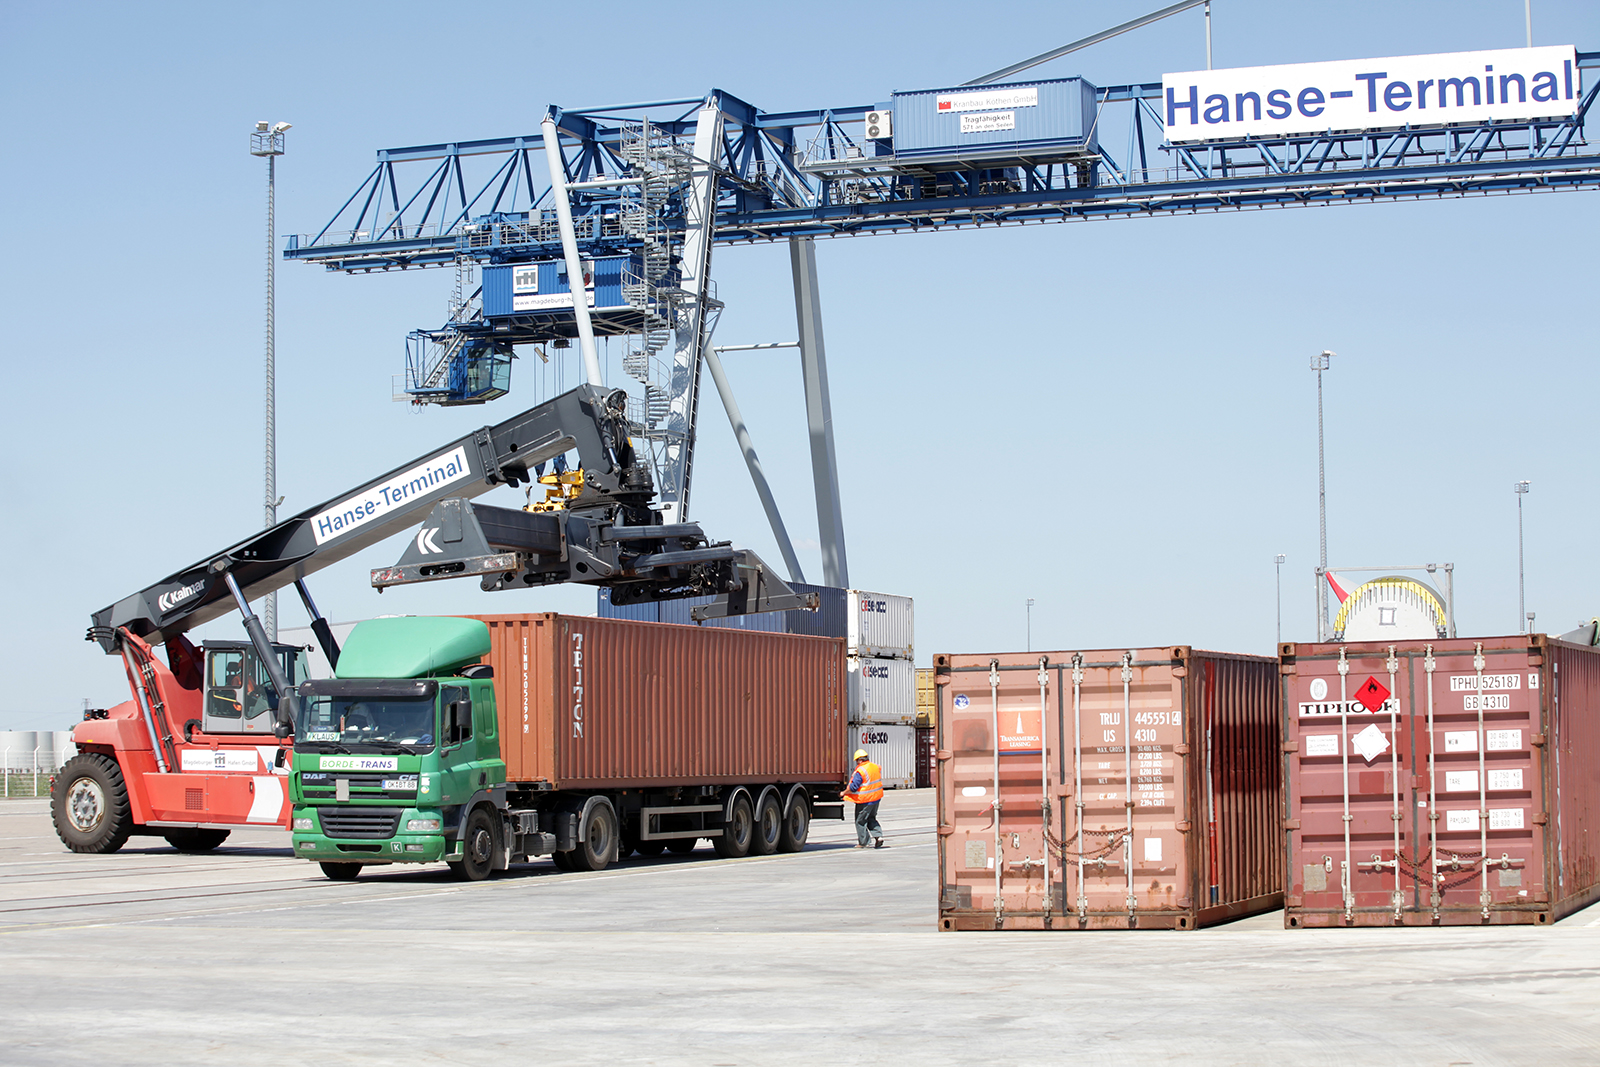 Automated solutions will also be introduced at the Port of Magdeburg in the future.